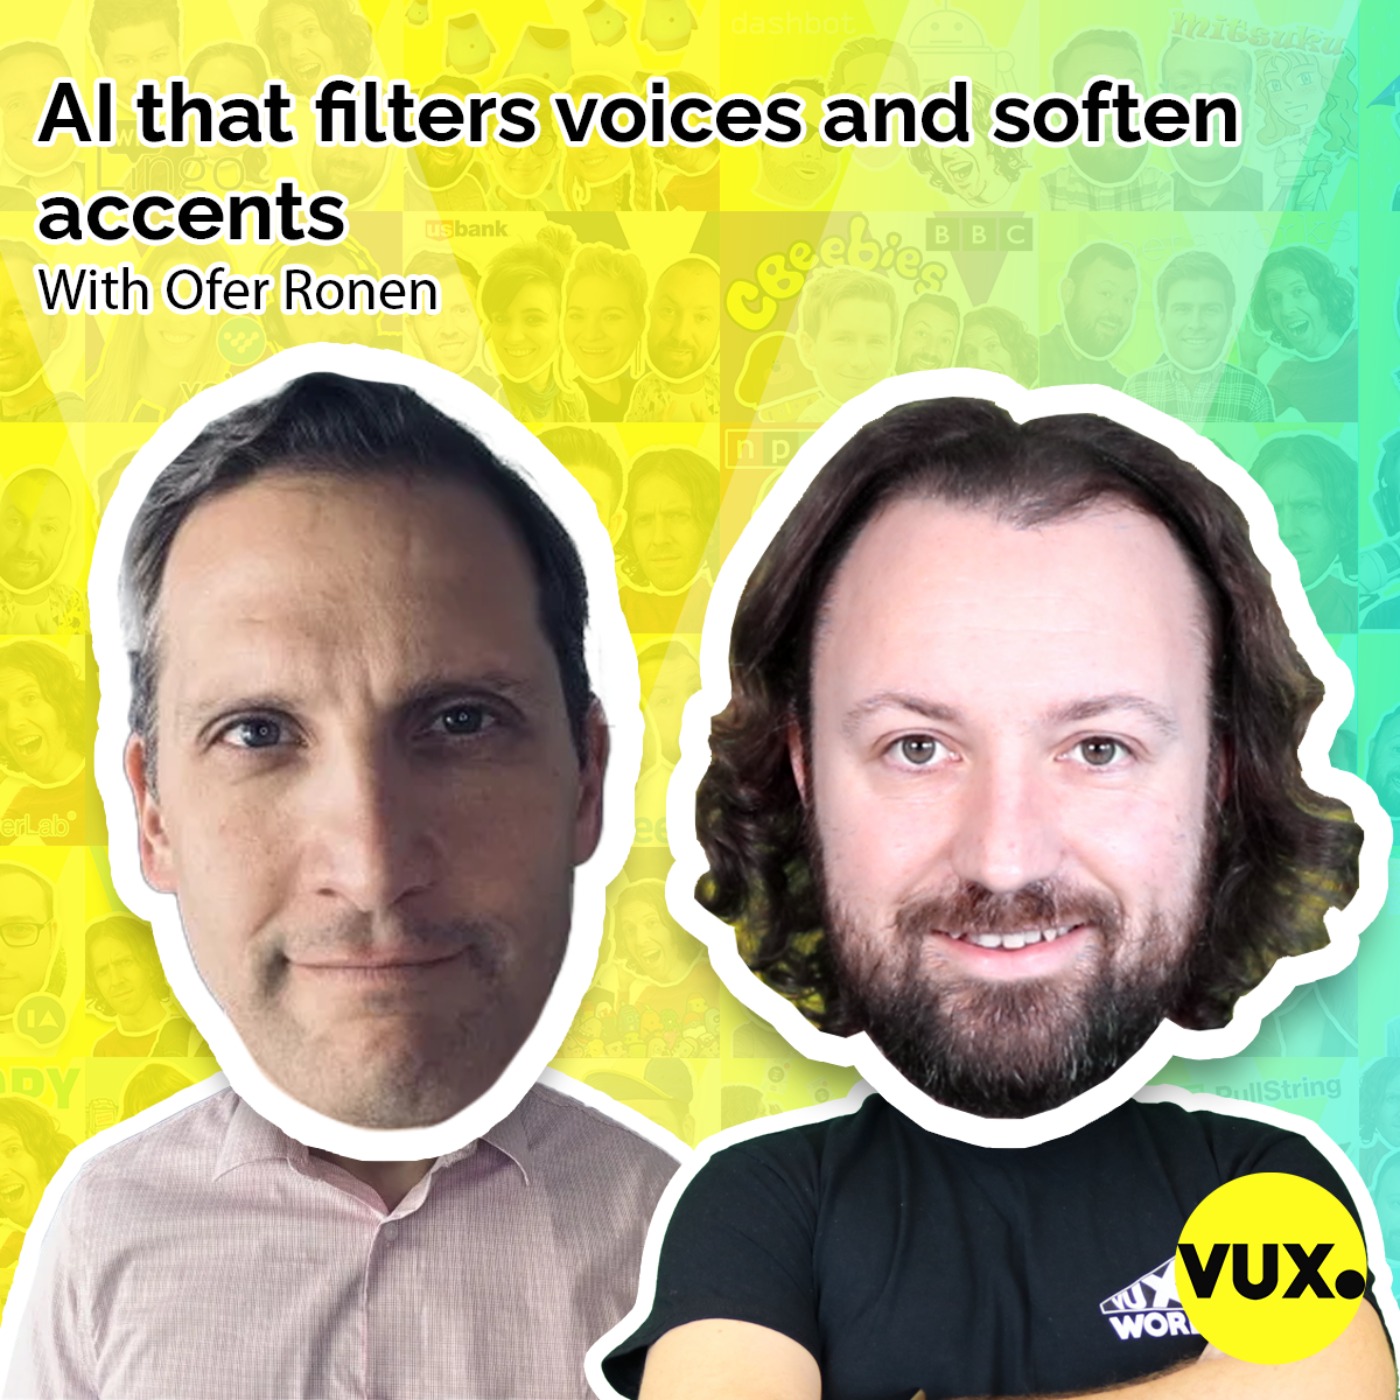 AI that filters voices and soften accents, with Ofer Ronen